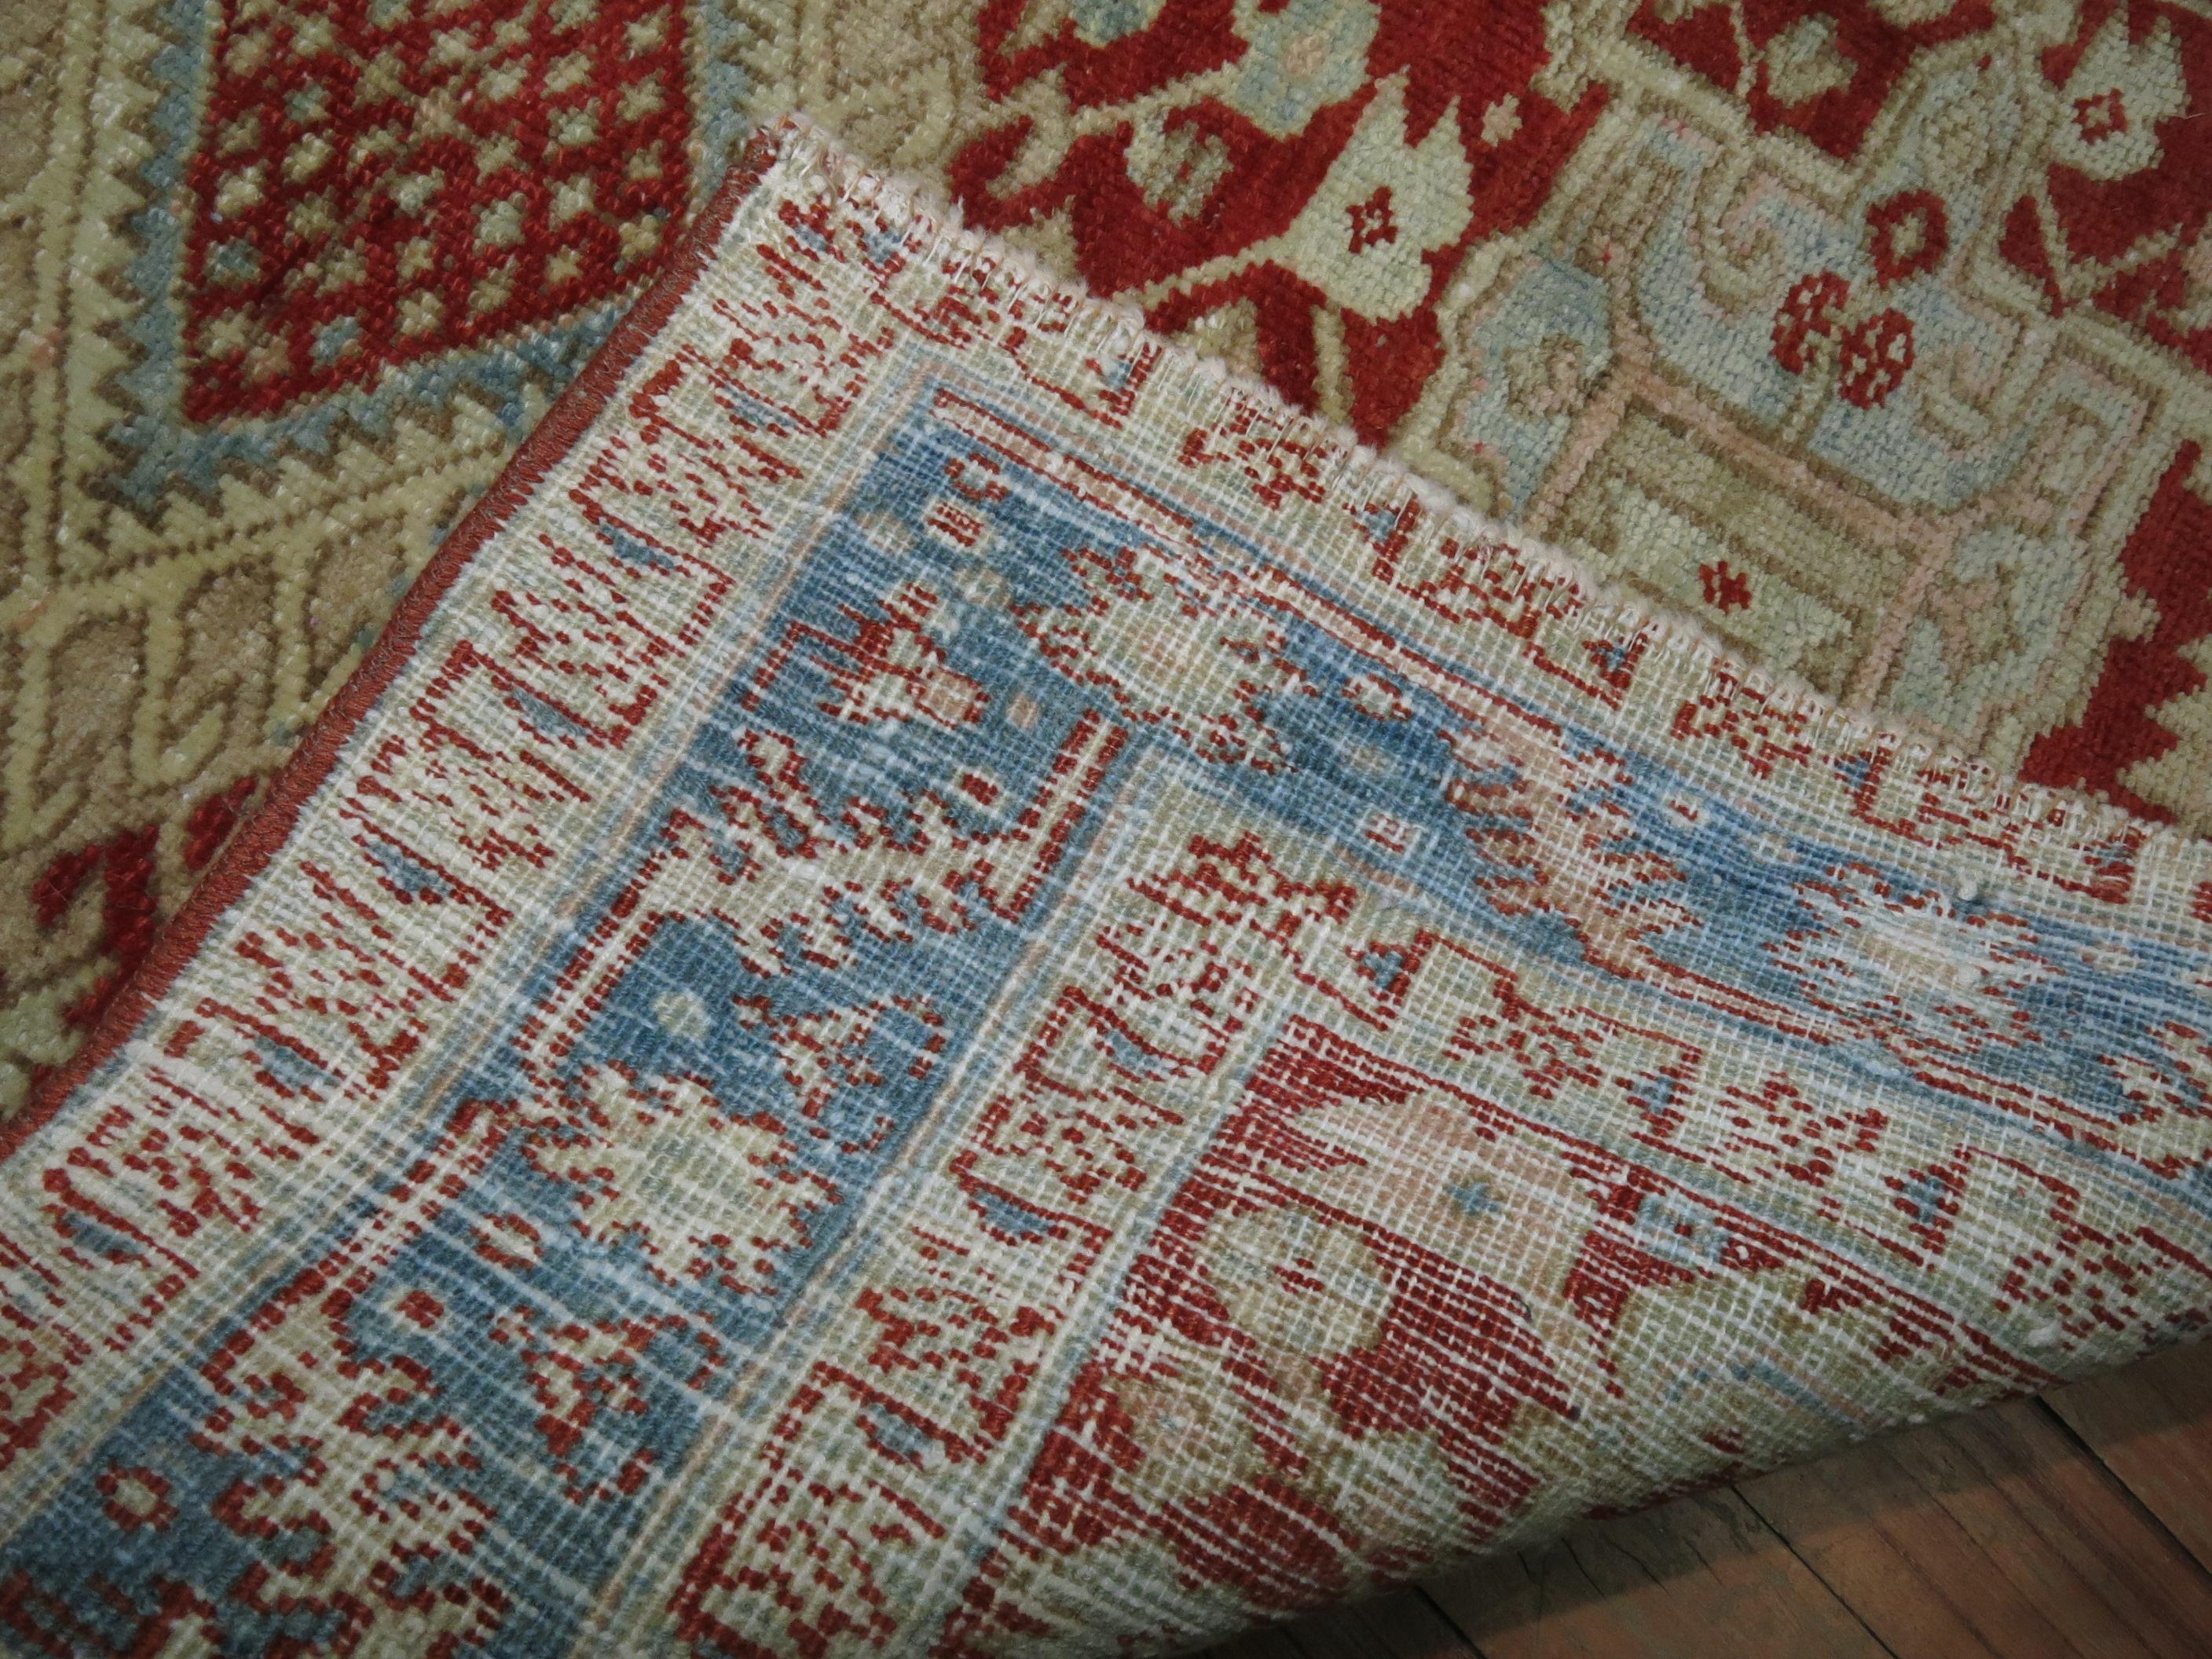 Hand-Woven Cranberry Icy Blue Square Size Antique Persian Heriz Scatter Wool Handwoven Rug For Sale